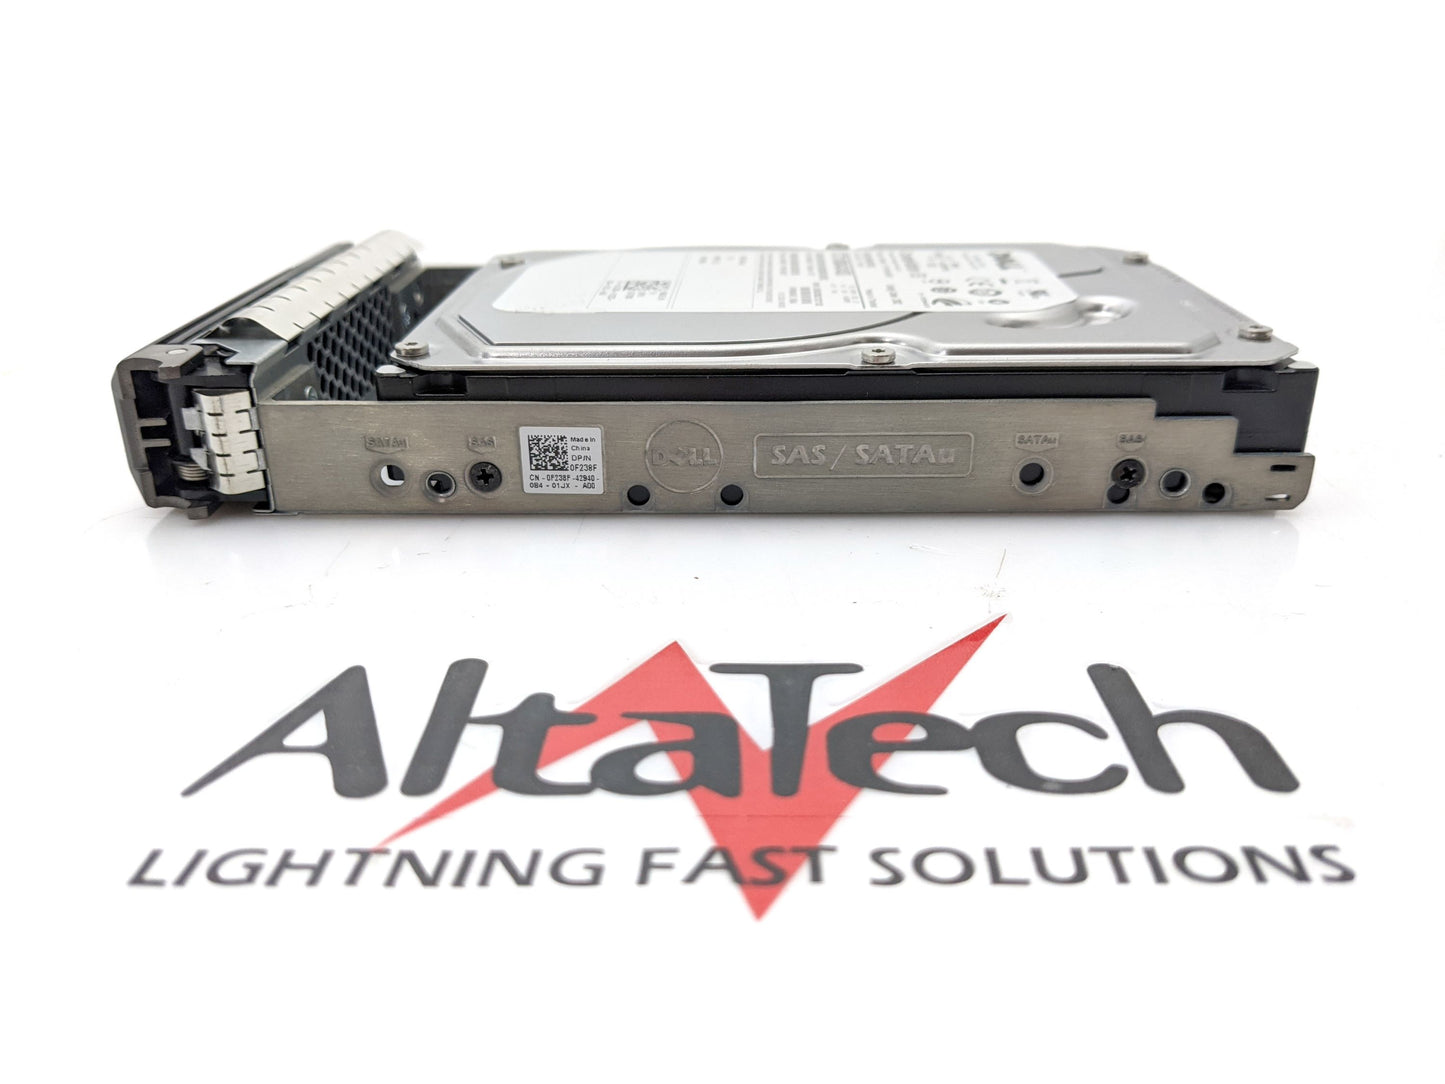 Seagate ST31000424SS Dell 9JX244-150 1TB 7.2K SAS 3.5 6G HDD Seagate ST31000424SS Hard Disk Drive, Used